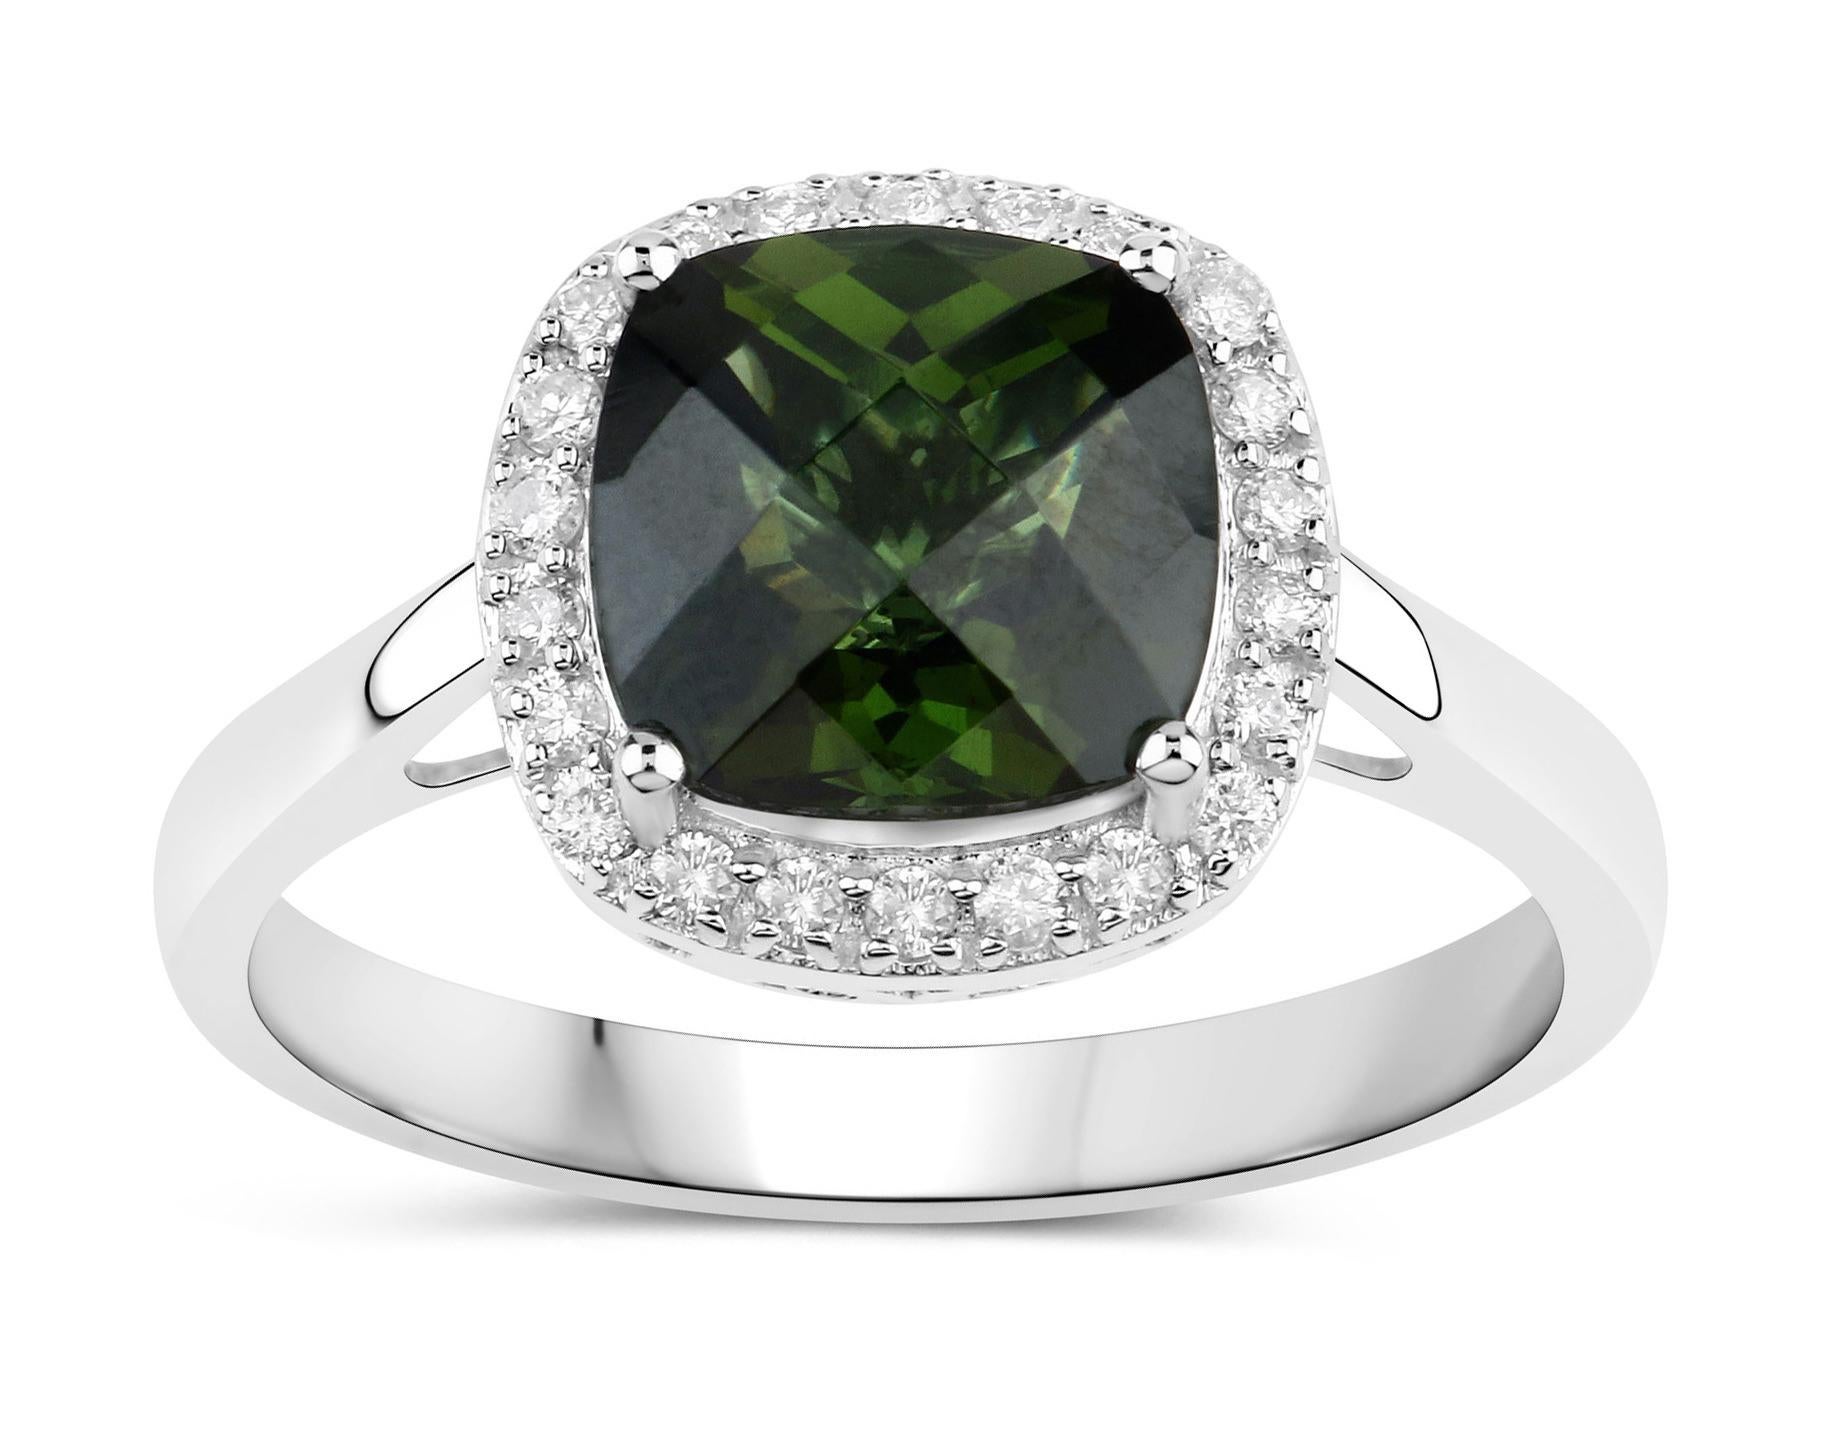 Natural 2.50 Carat Green Tourmaline Ring With Diamond Halo 14K White Gold In New Condition For Sale In Laguna Niguel, CA